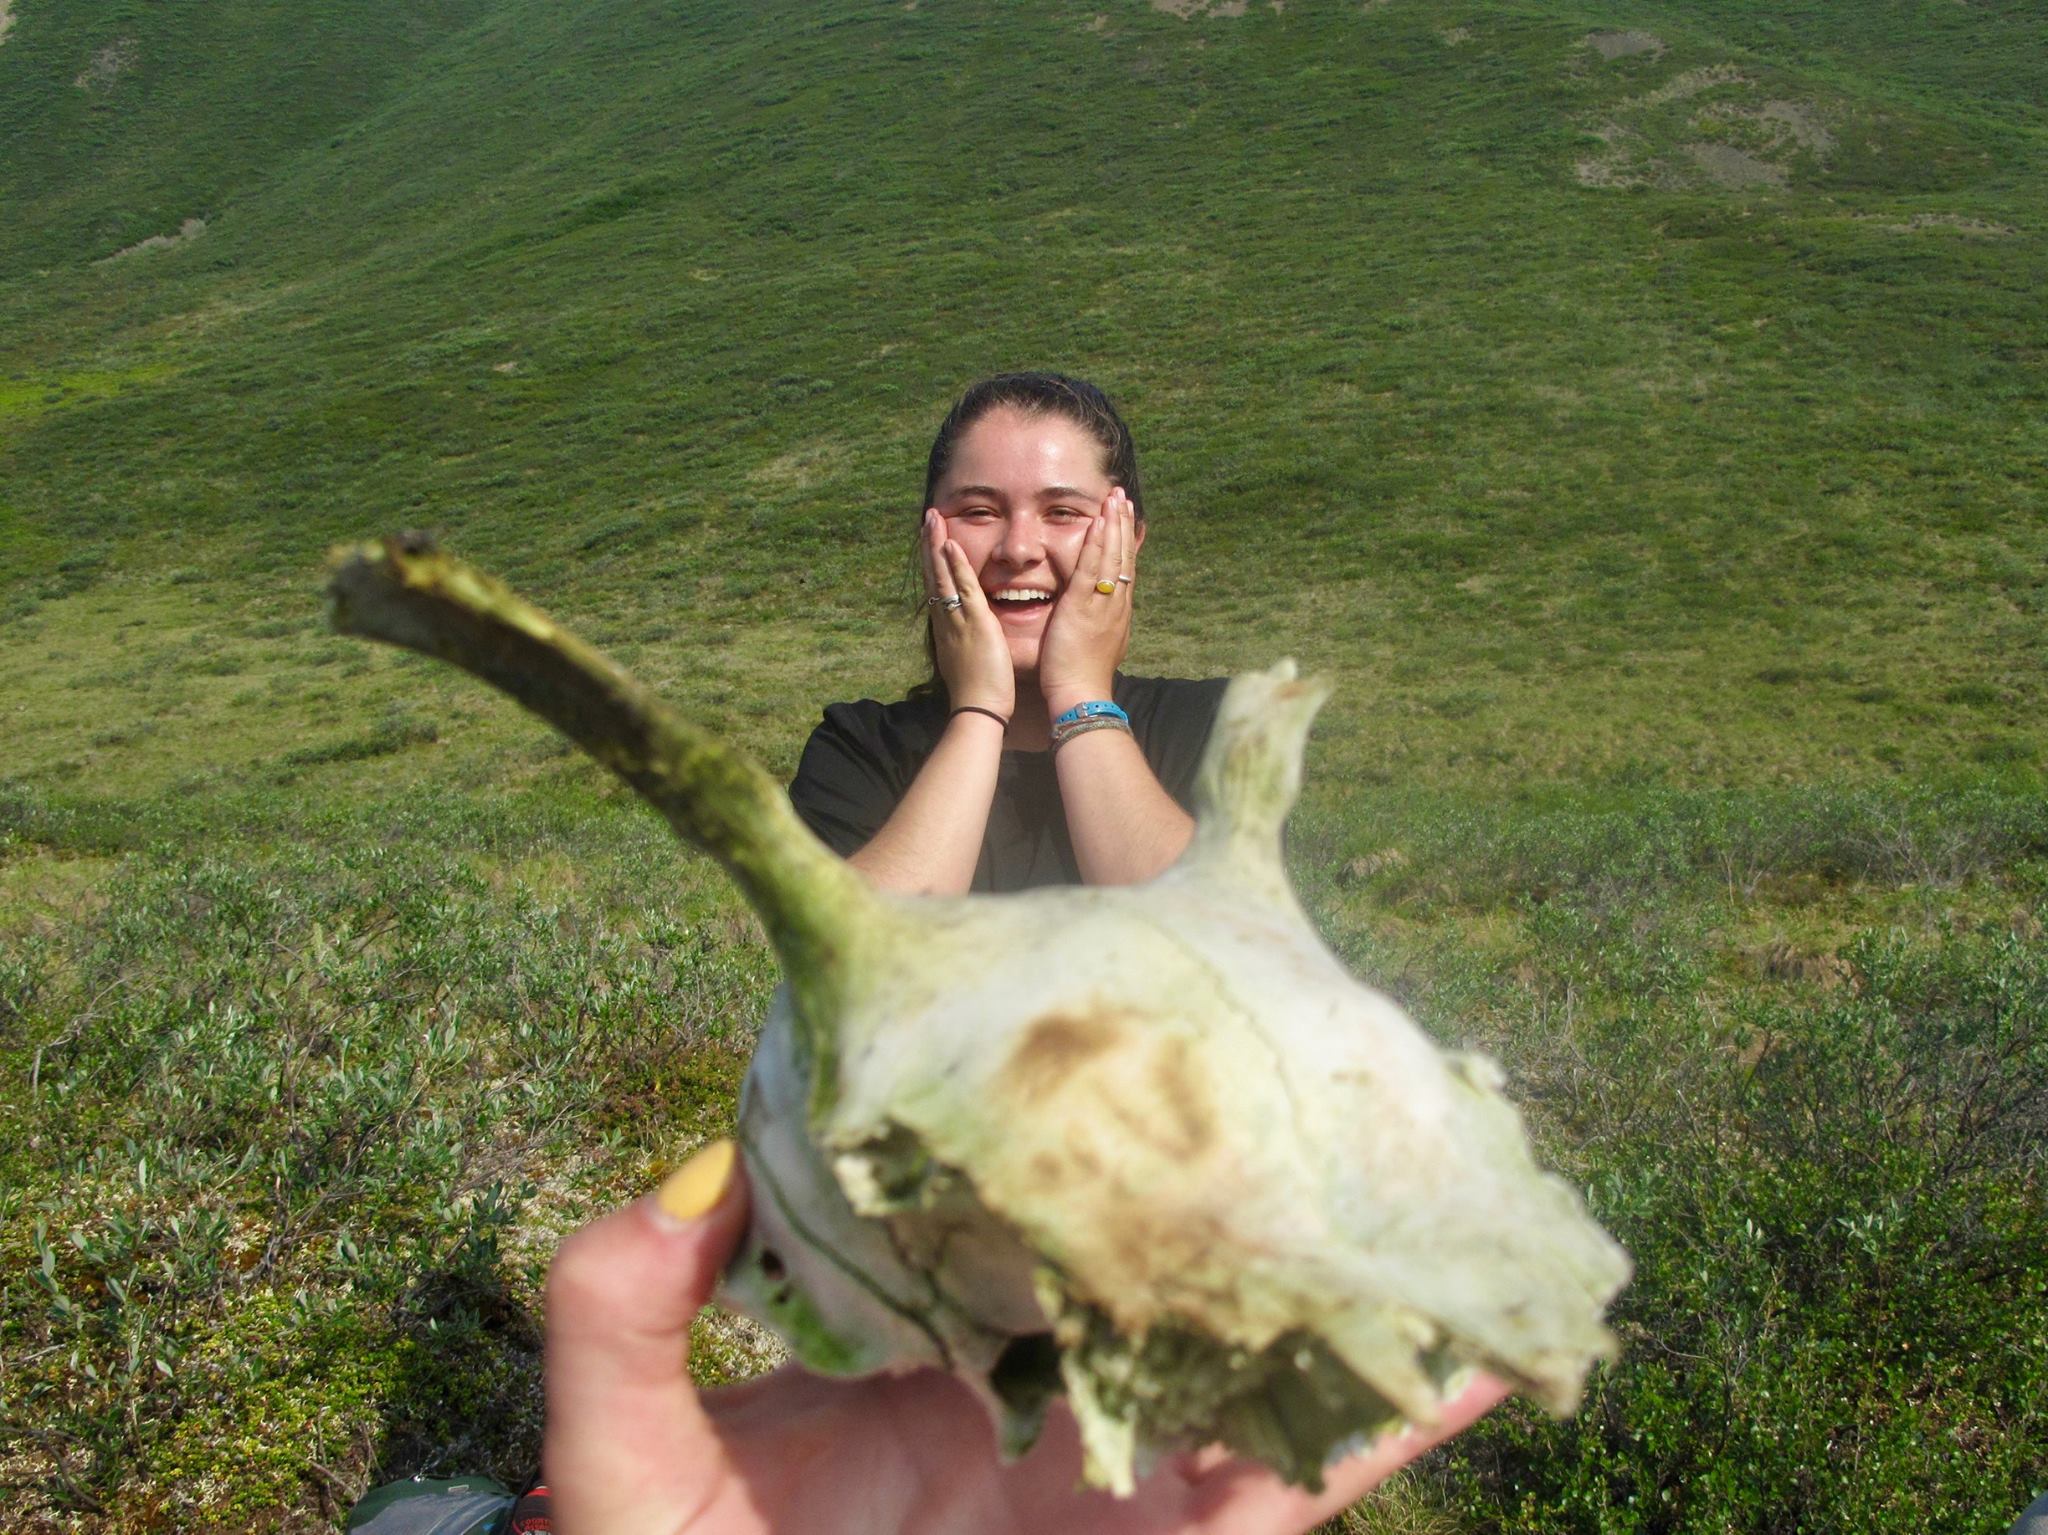 Rebecca is thrilled by a sheep skull.